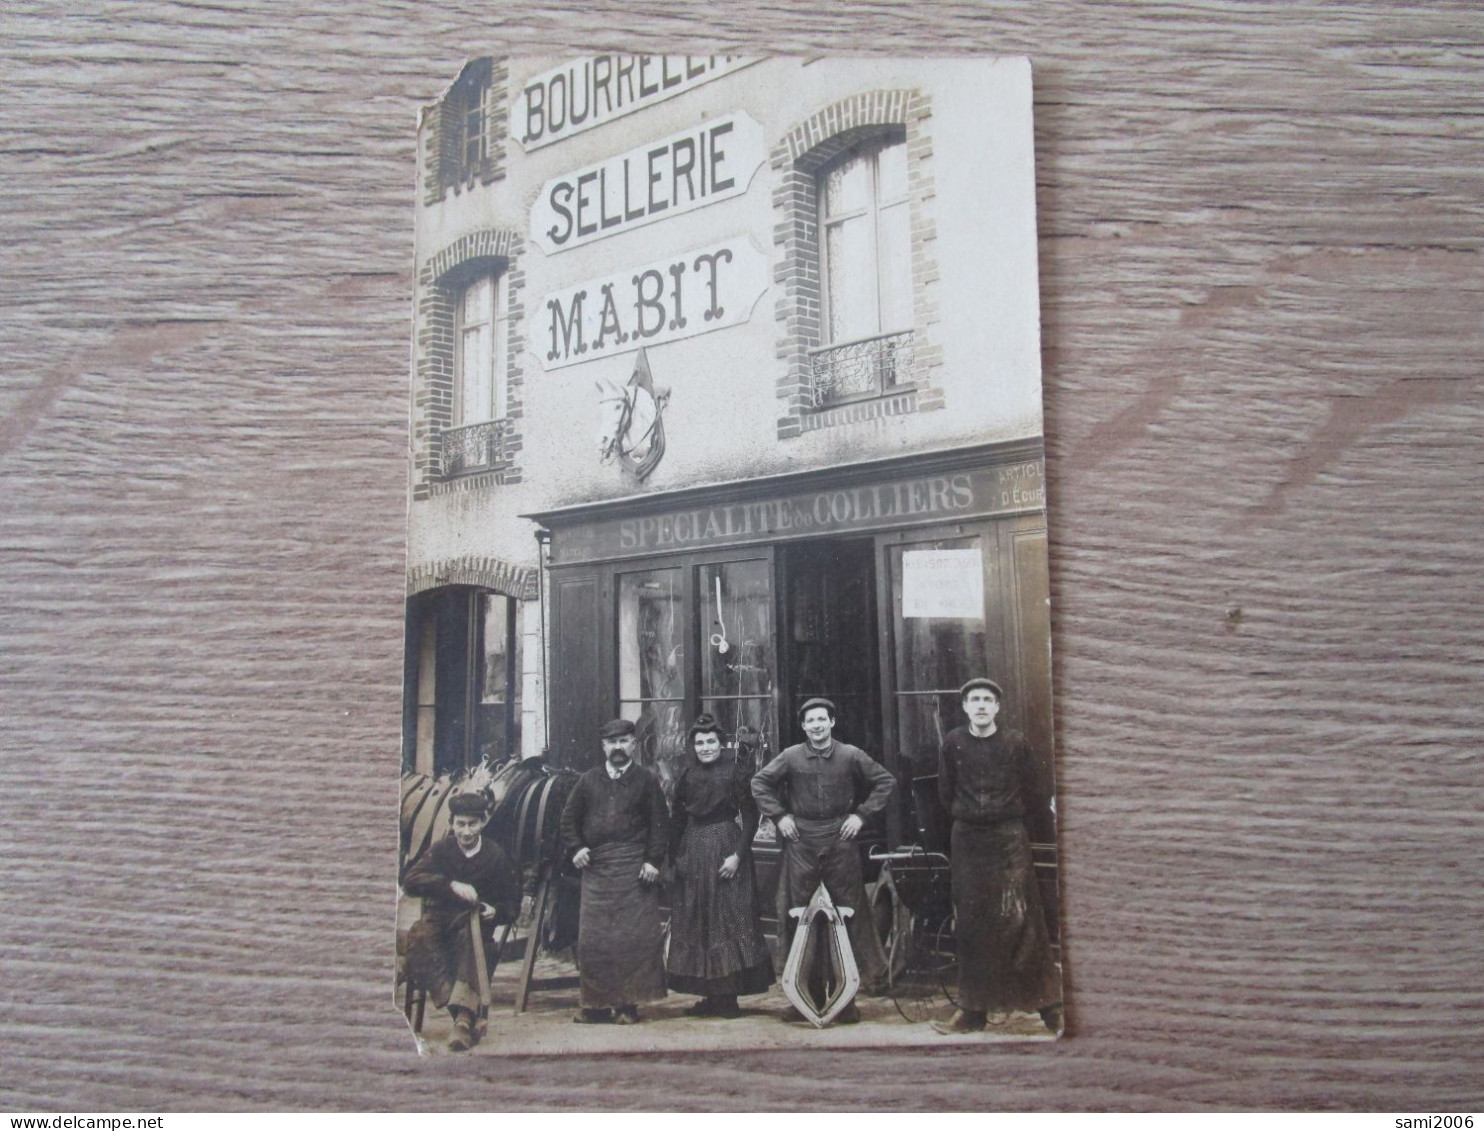 CPA PHOTO COMMERCE BOURRELIER SELLERIE MABIT SPECIALITE DE COLLIERS ANIMEE - Magasins